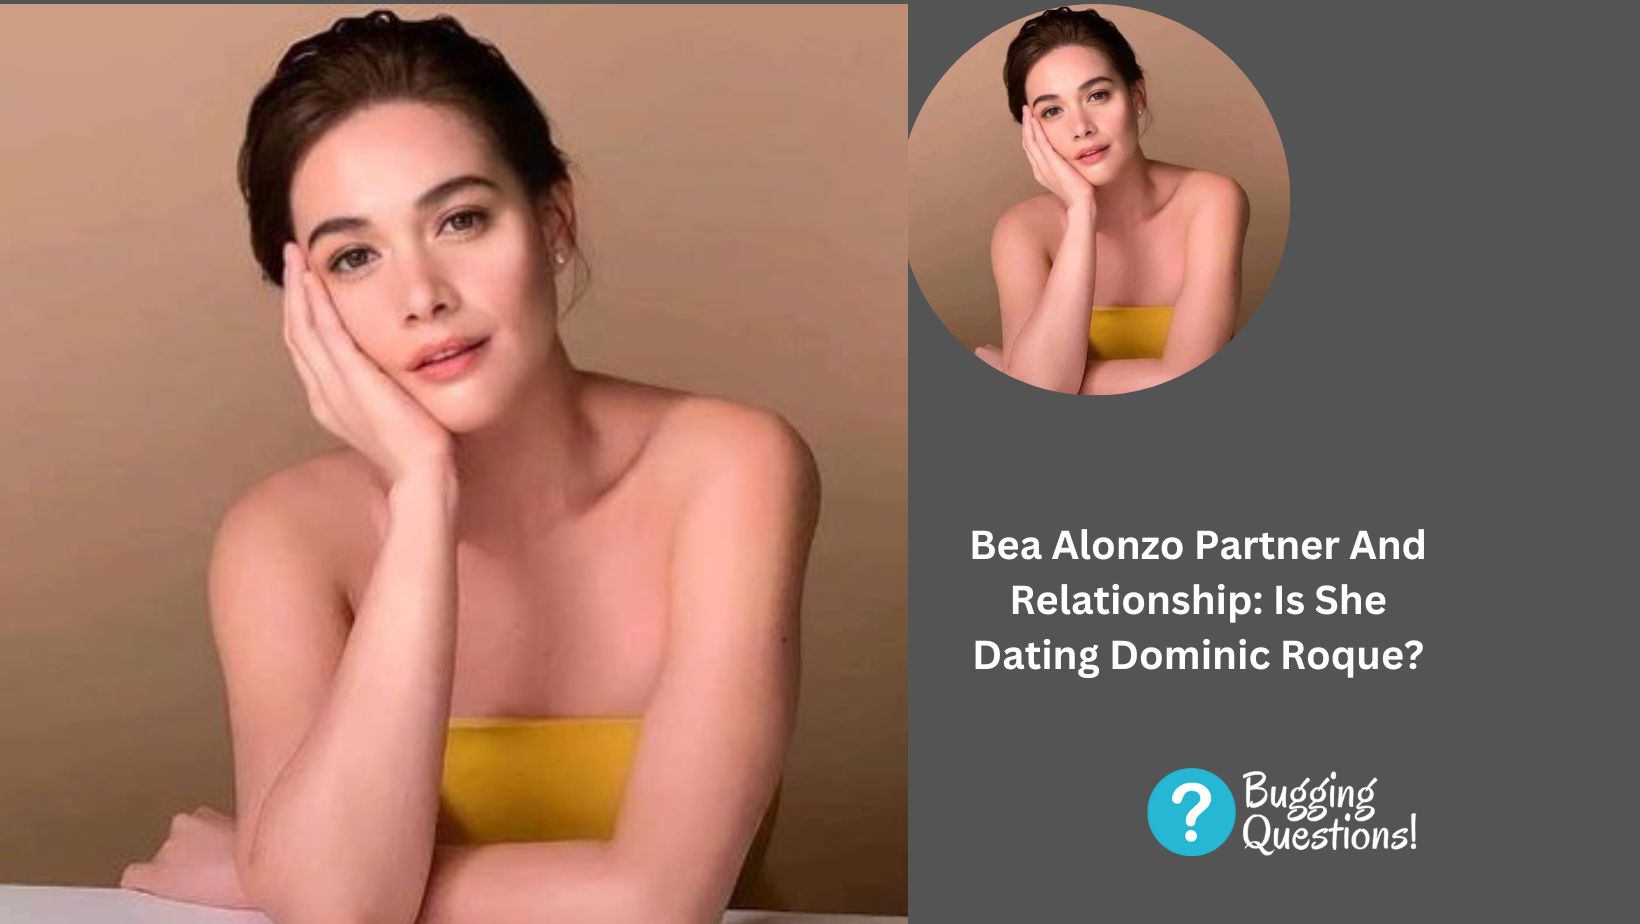 Bea Alonzo Partner And Relationship: Is She Dating Dominic Roque?